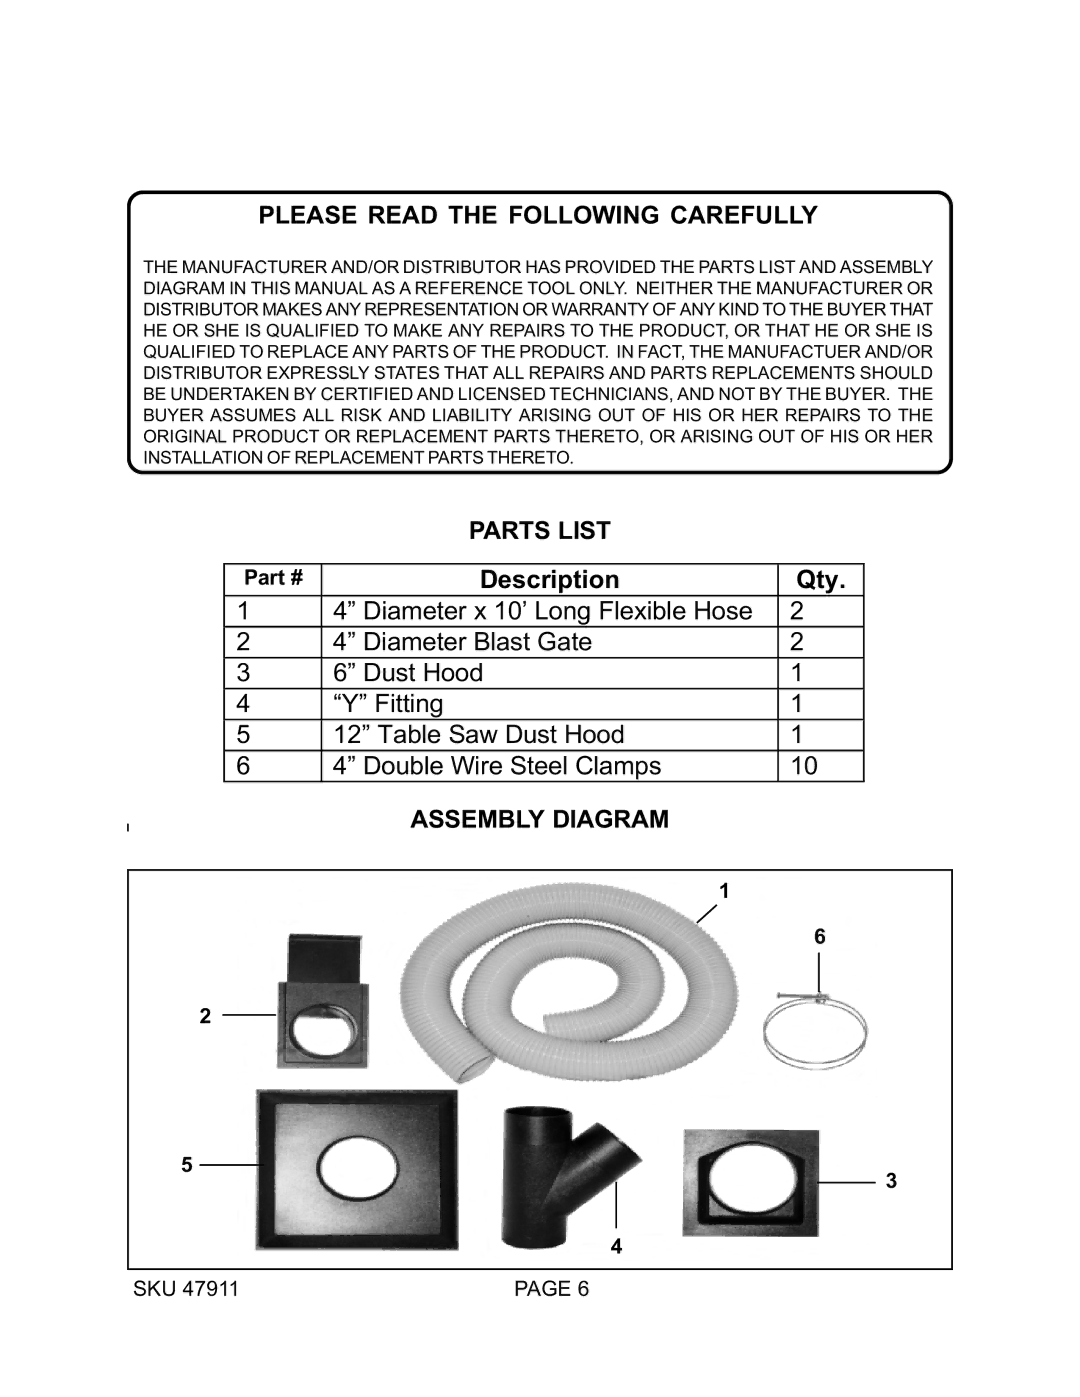 Harbor Freight Tools 47911 operating instructions Please Read the Following Carefully, Parts List Assembly Diagram 